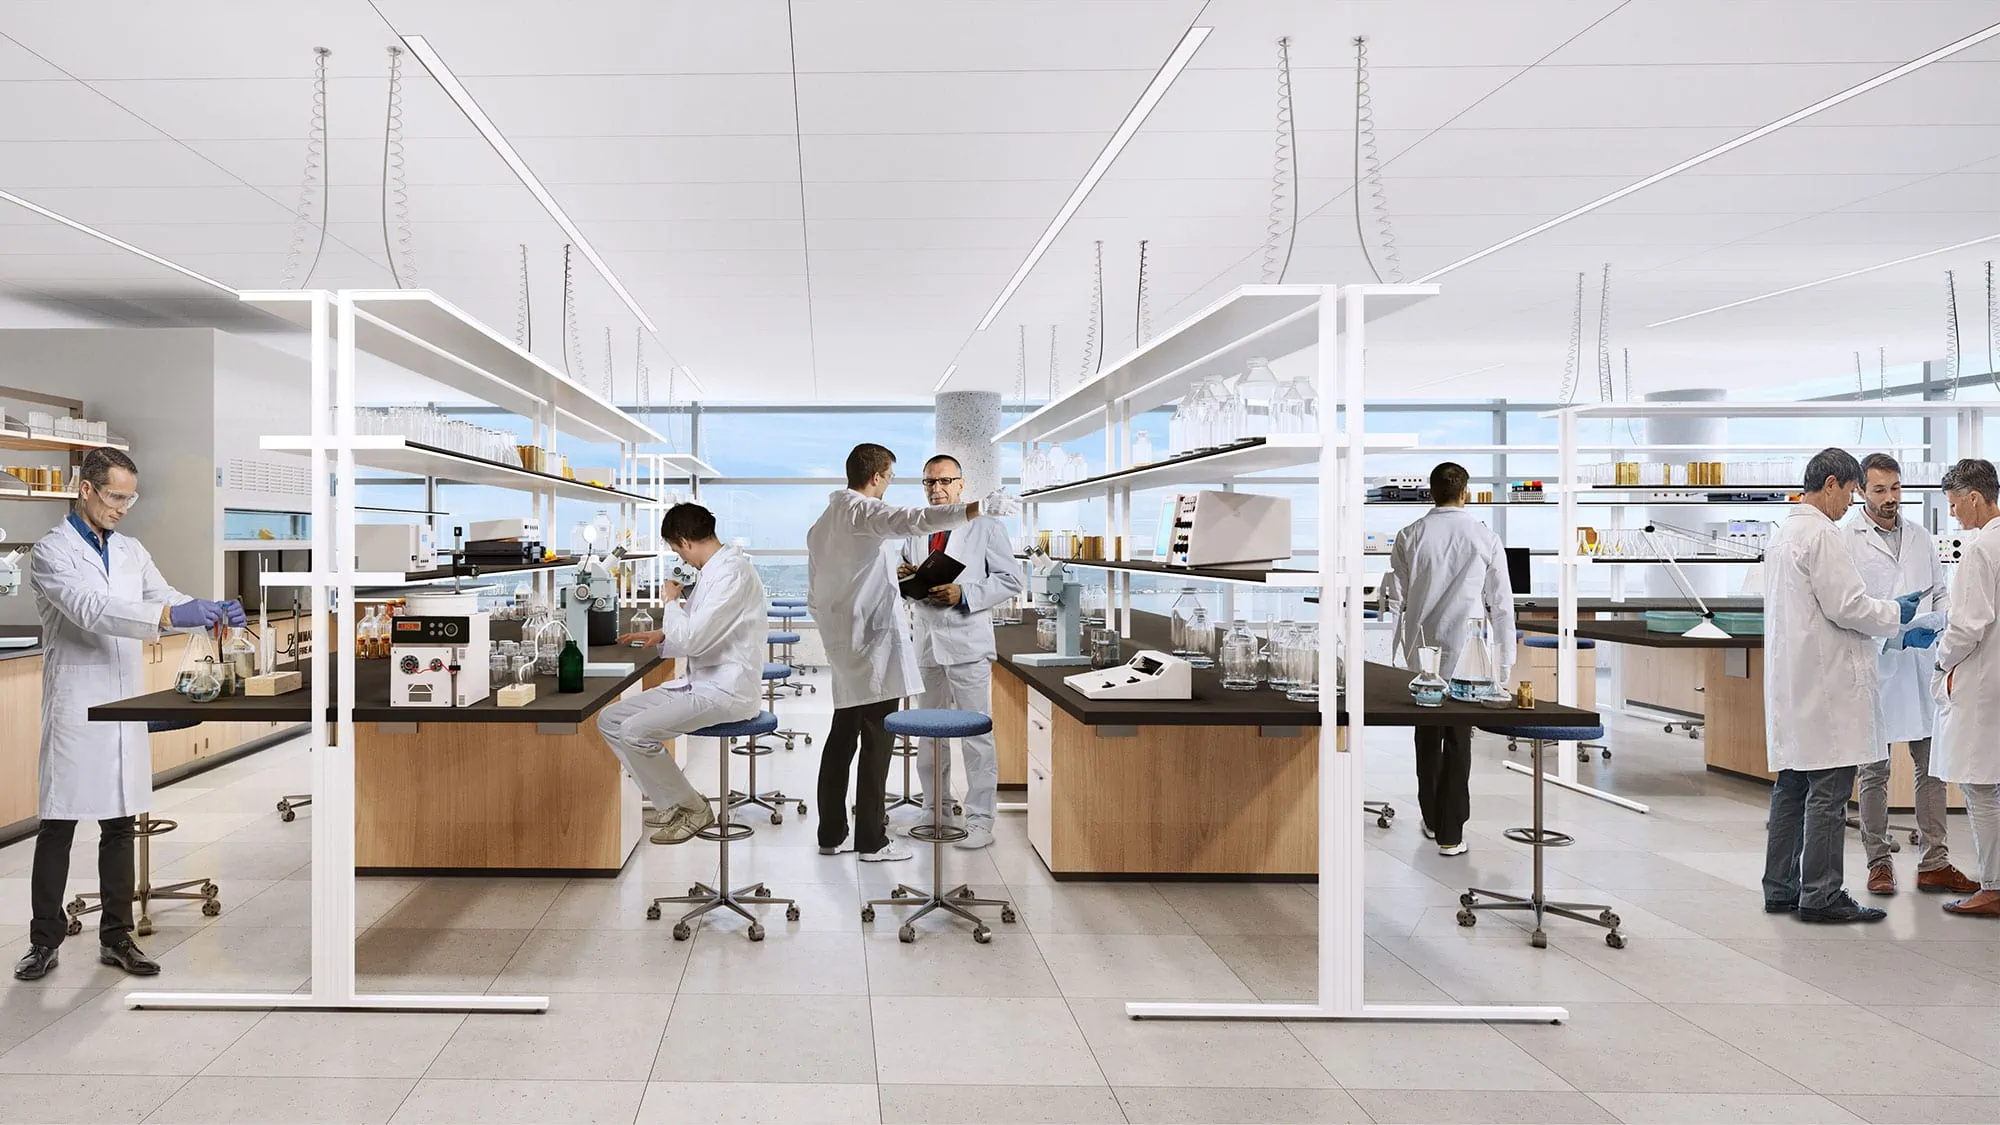 Scientists collaborate together in open concept lab space